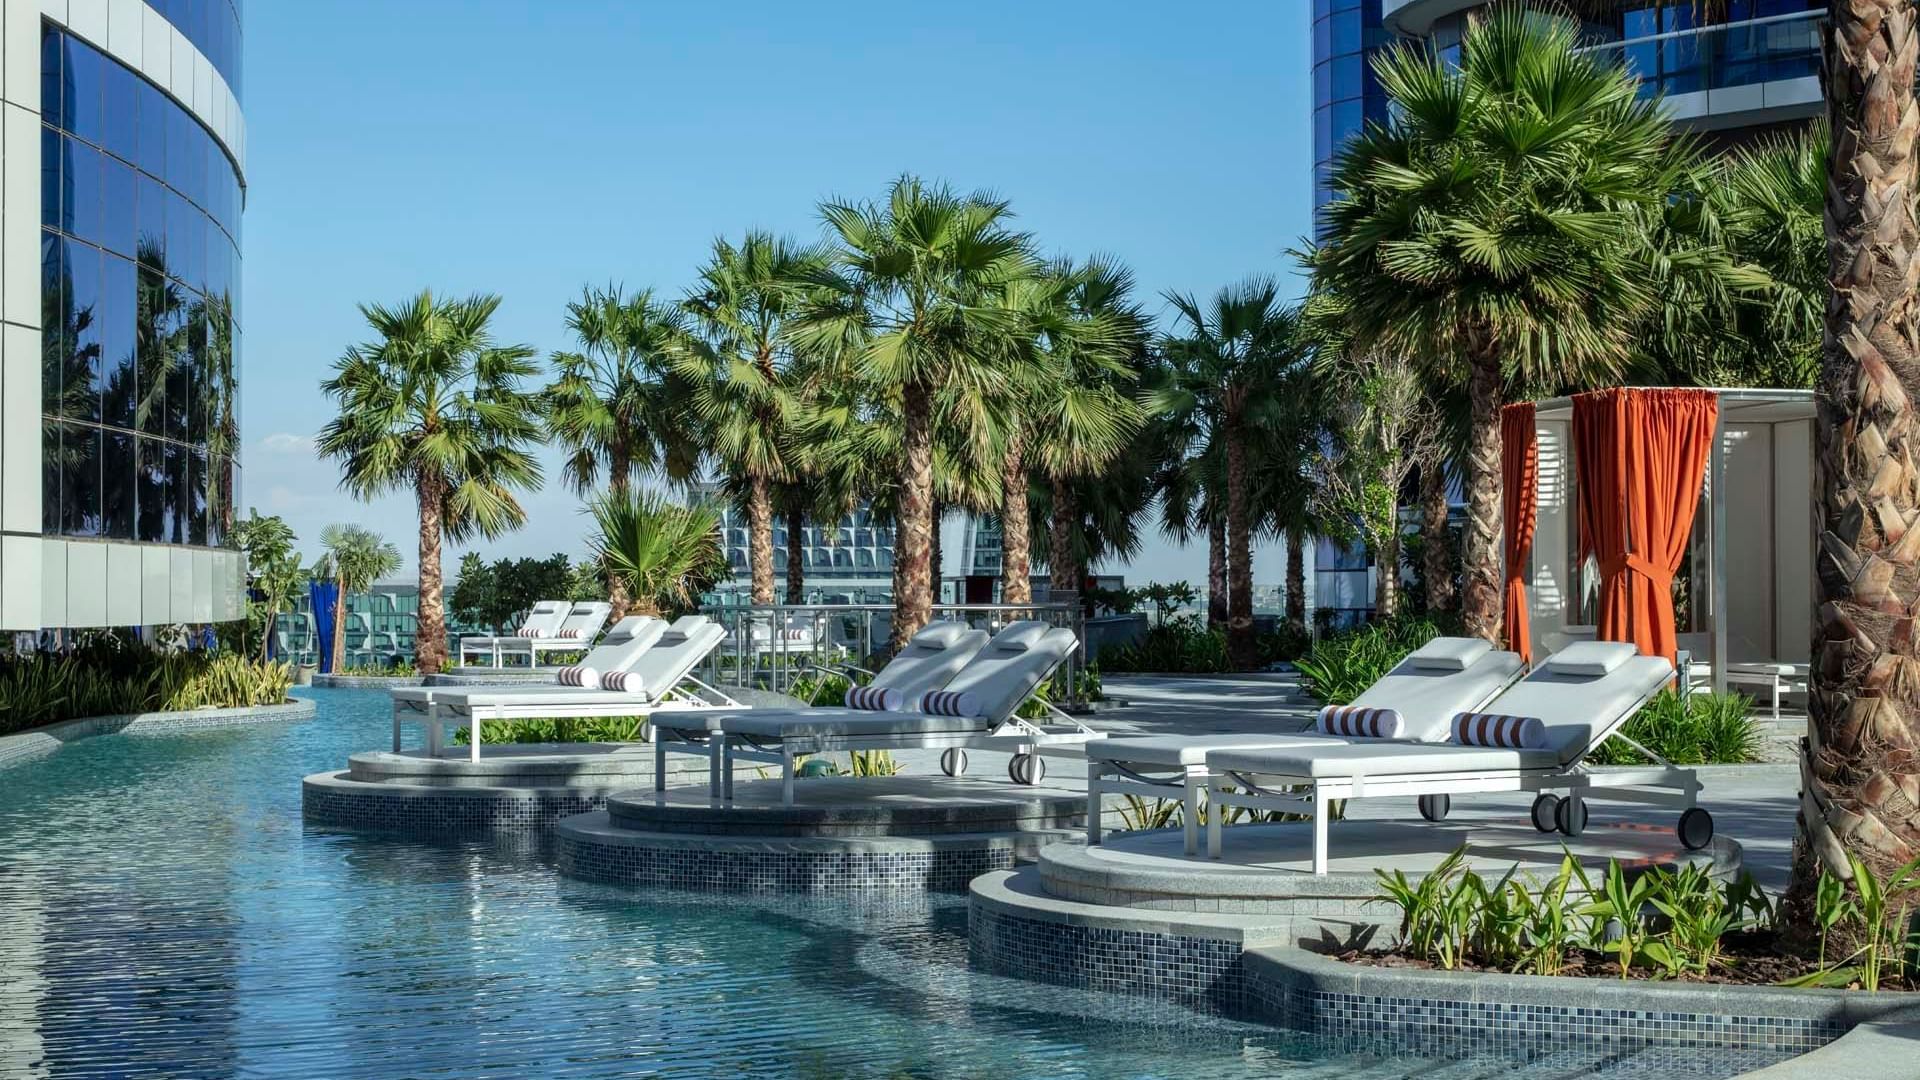 Pool deck with pool beds at Paramount Hotel Dubai